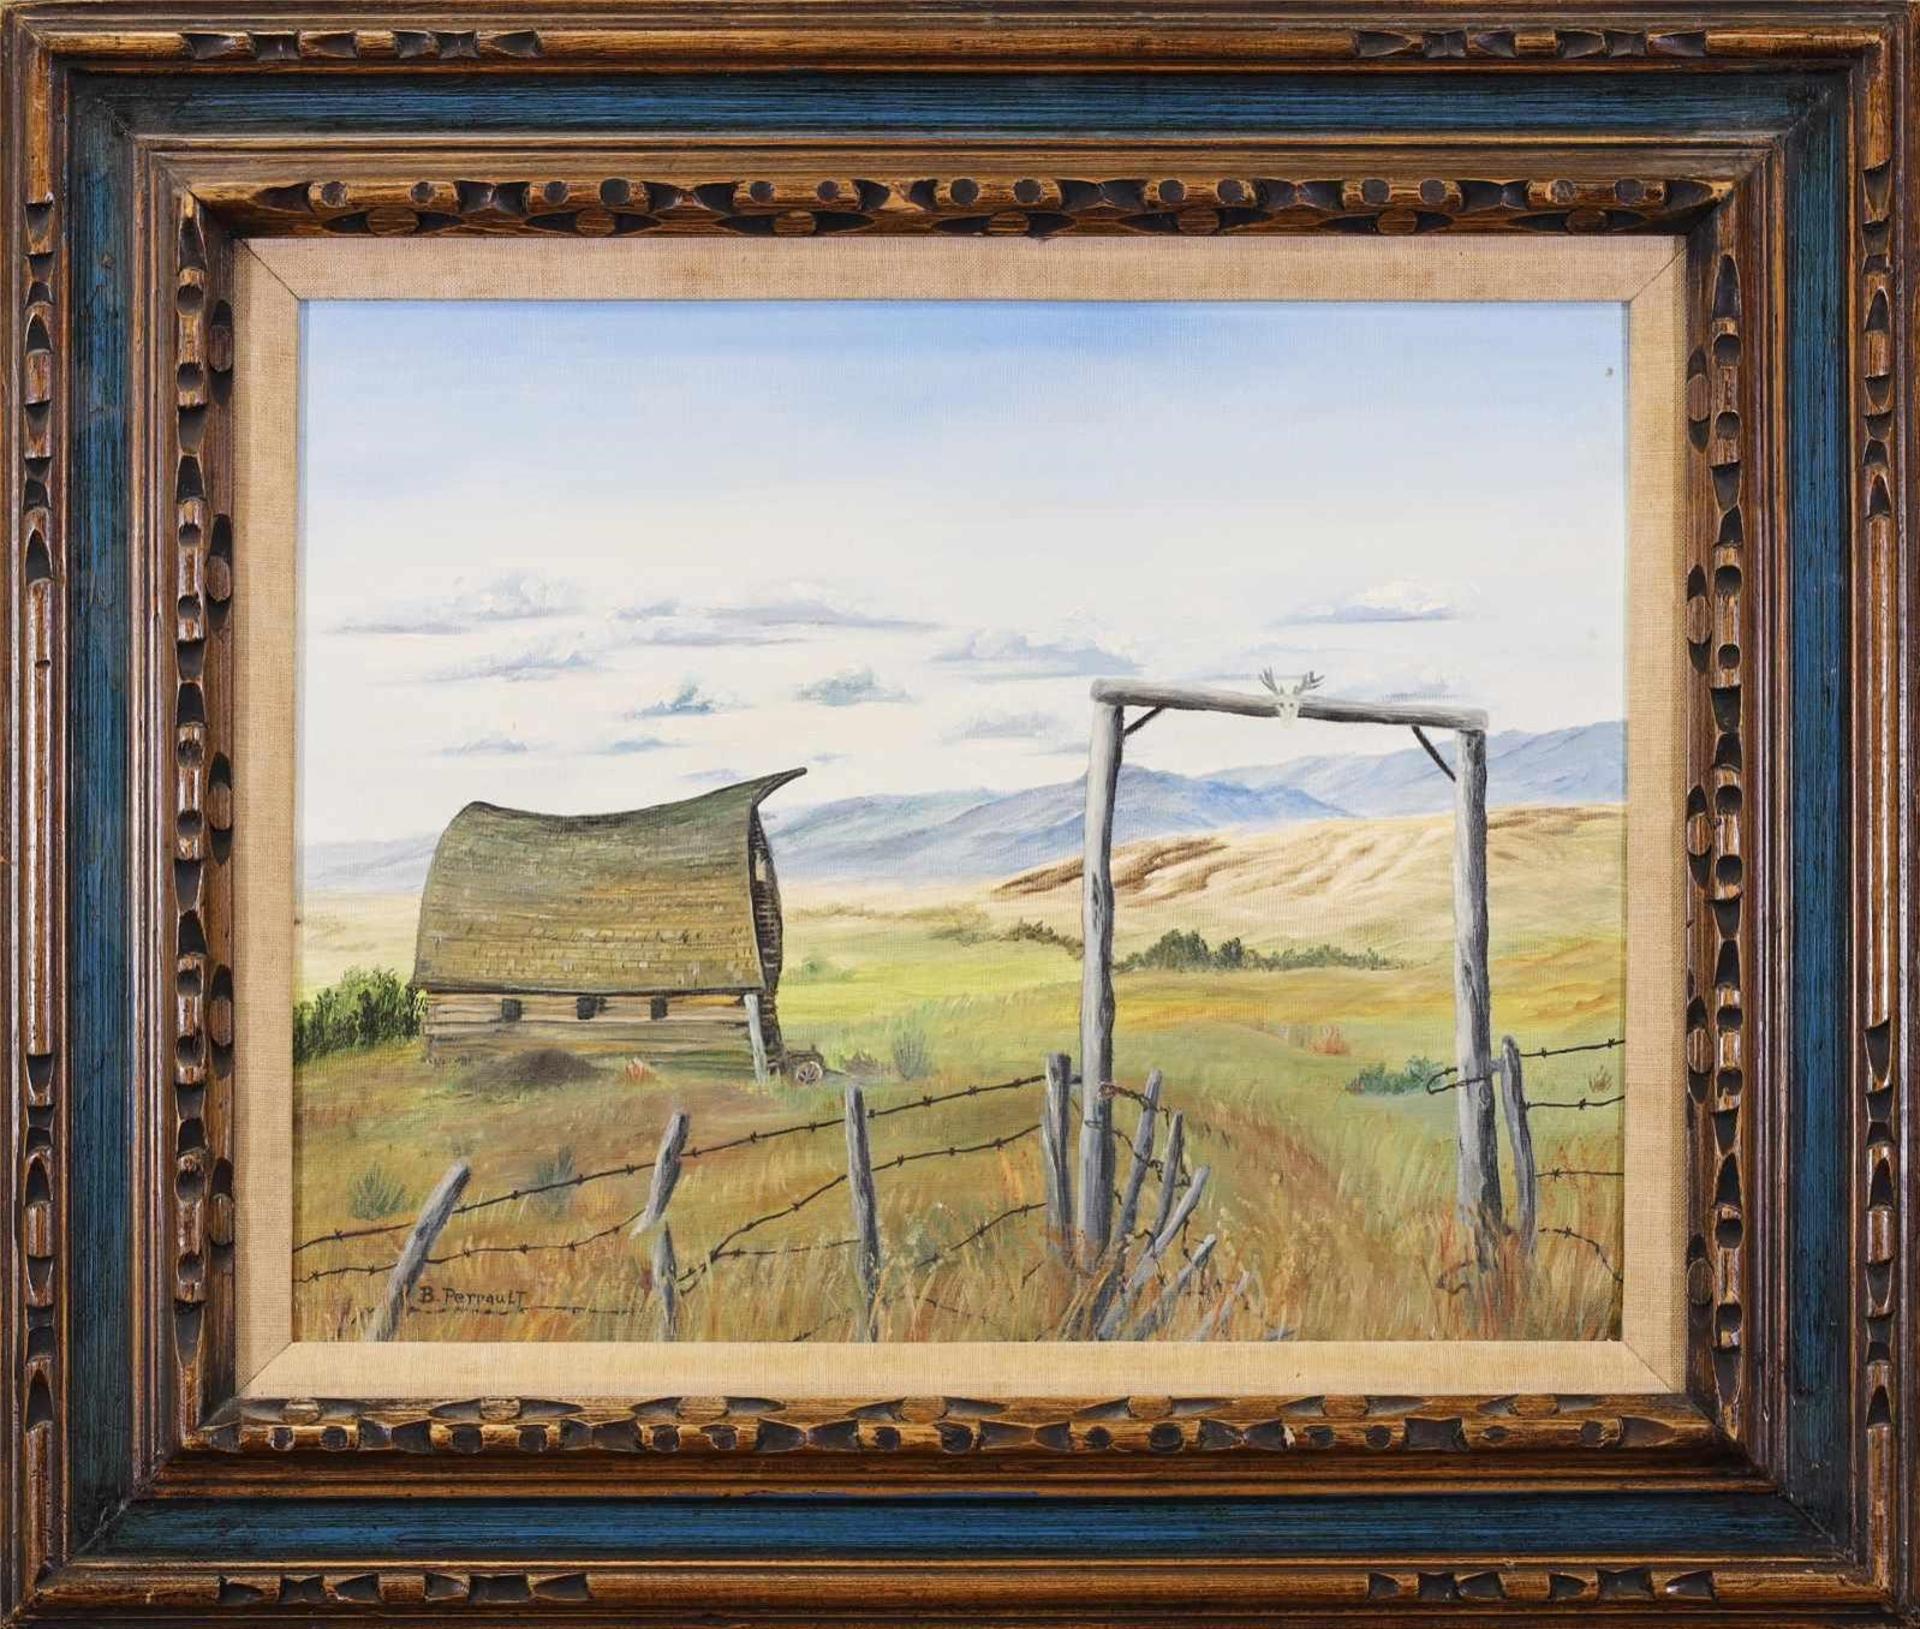 Sister Beatrice Perreault (1902-1998) - Old Bar Ranch